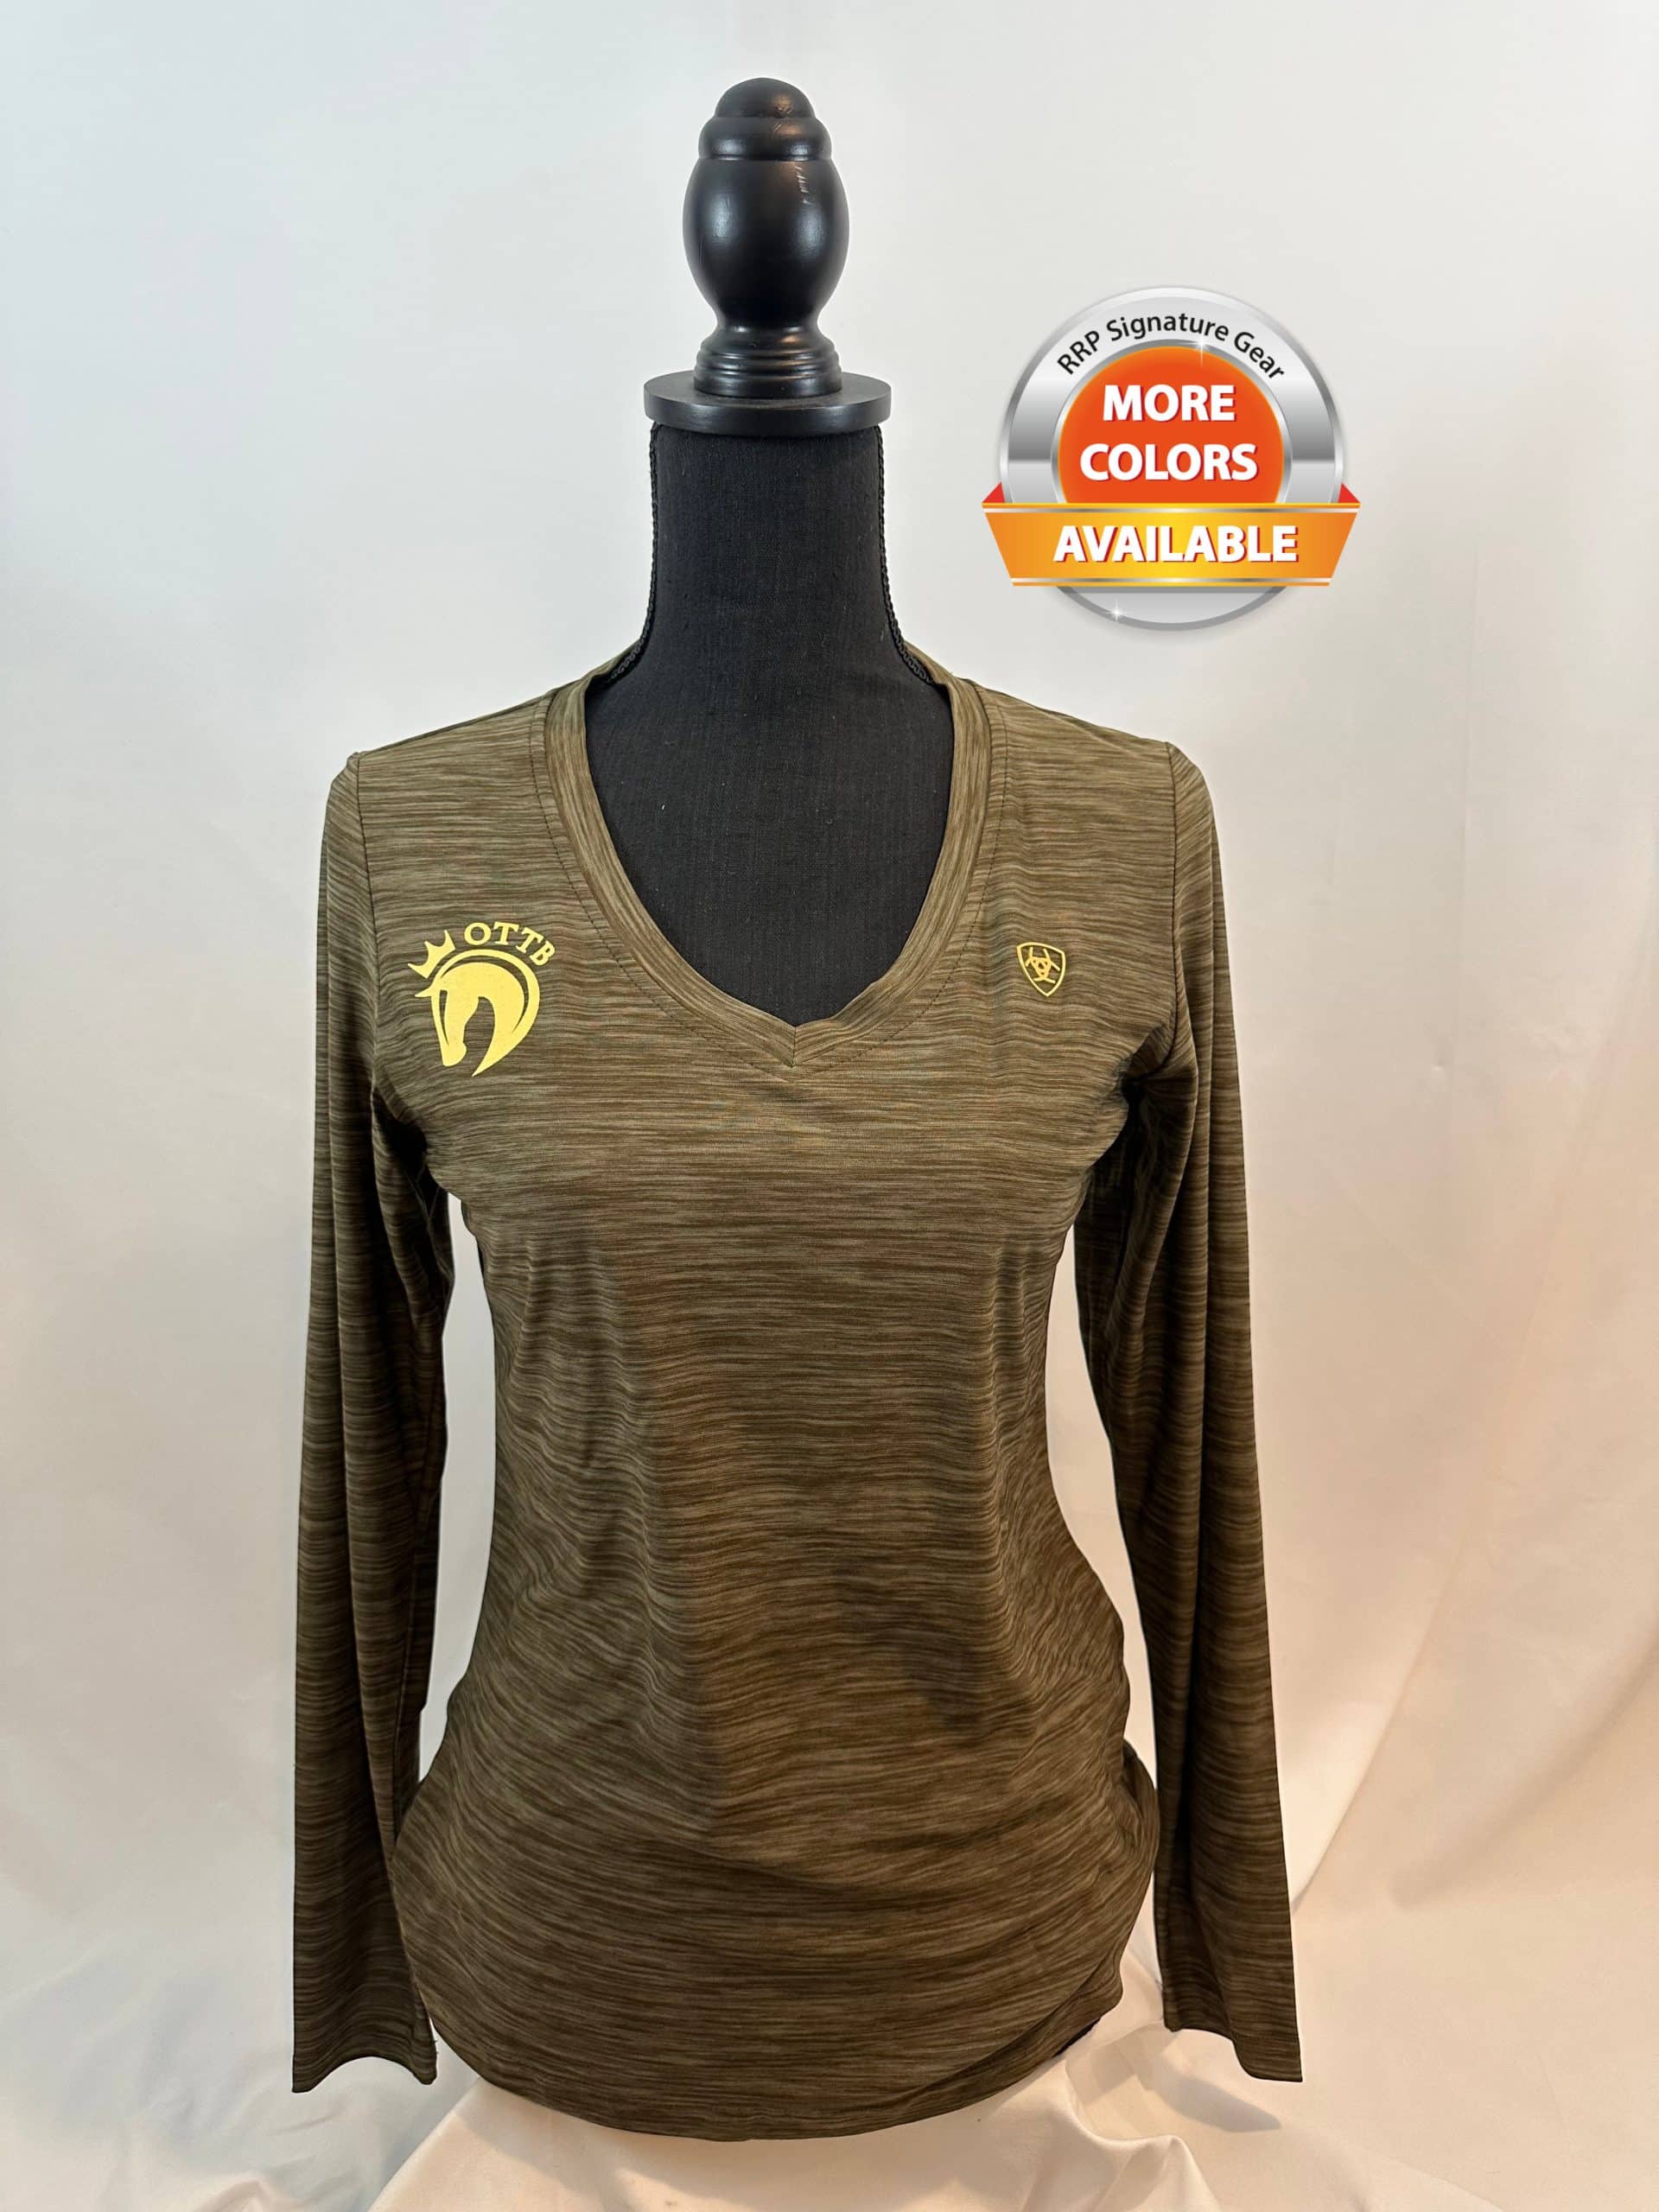 Featured image for “Ariat Laguna Long Sleeve”